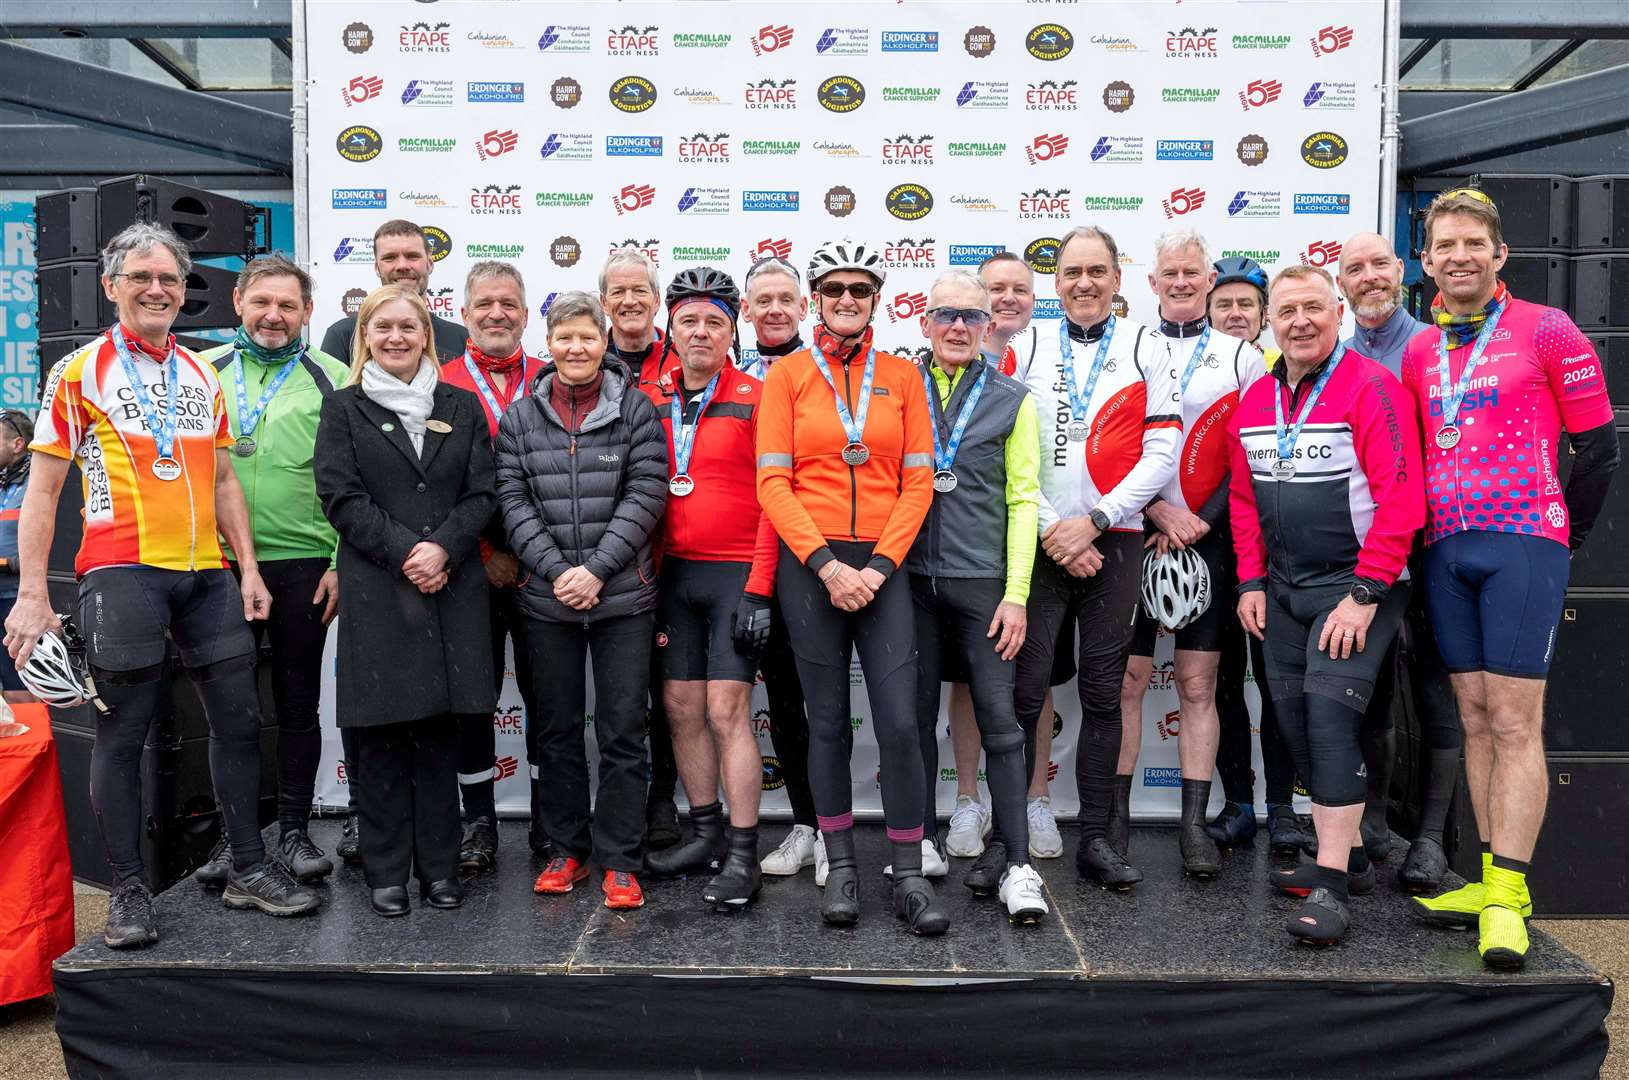 The group of riders who have taken part in all 10 events.